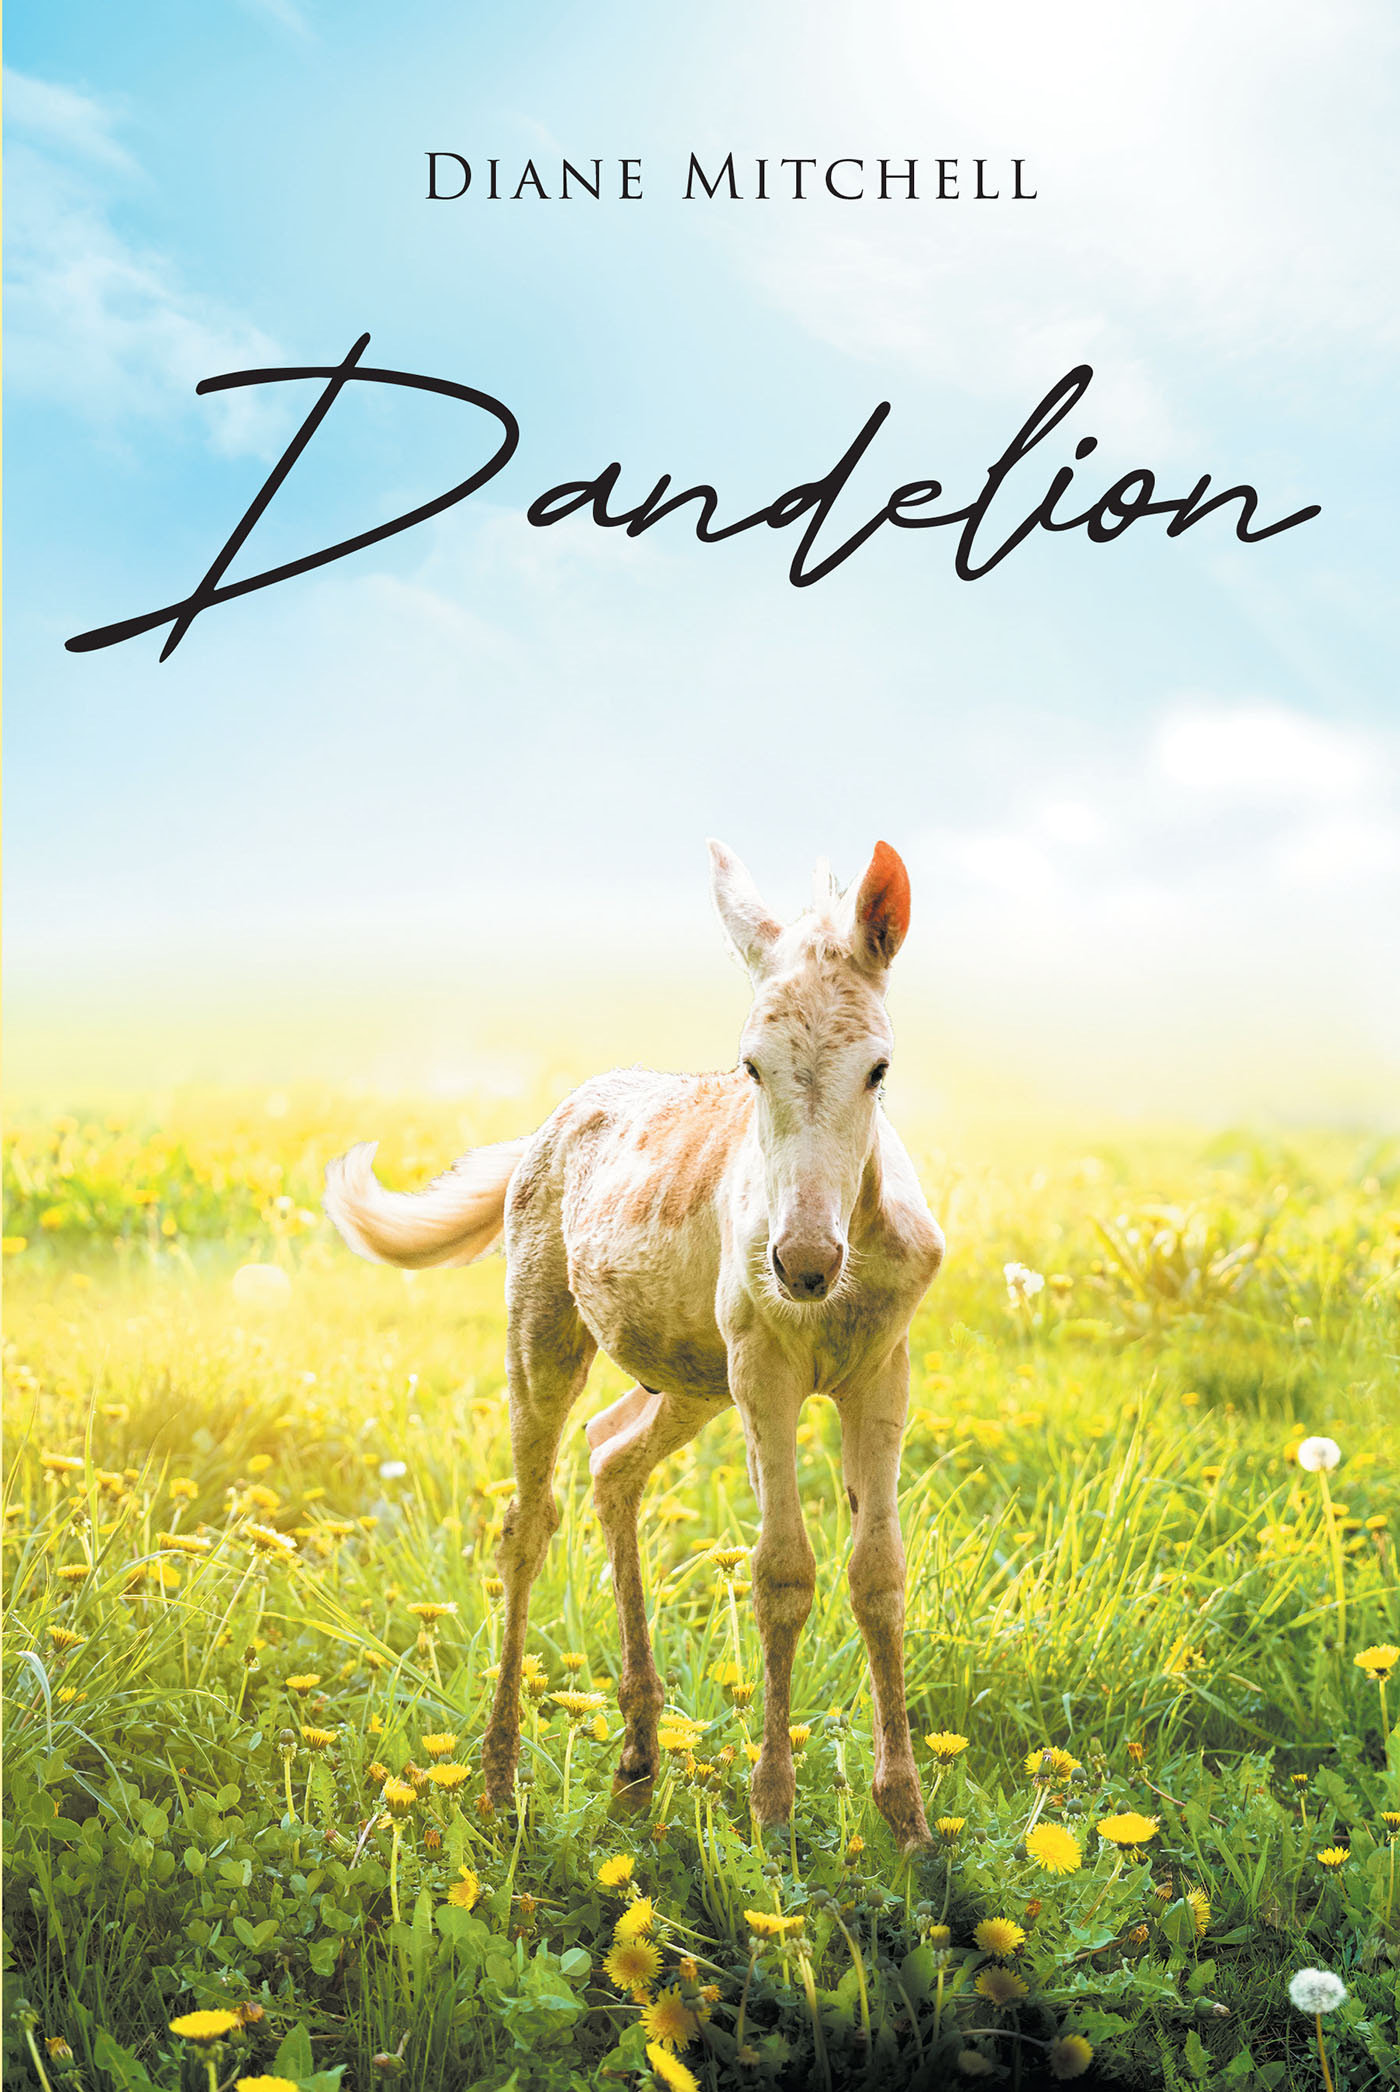 Diane Mitchell’s New Book, "Dandelion," is a Moving Romance About Love Persevering Over Hardship Backdropped by the Wild Mustang Roundups of the Early 20th Century